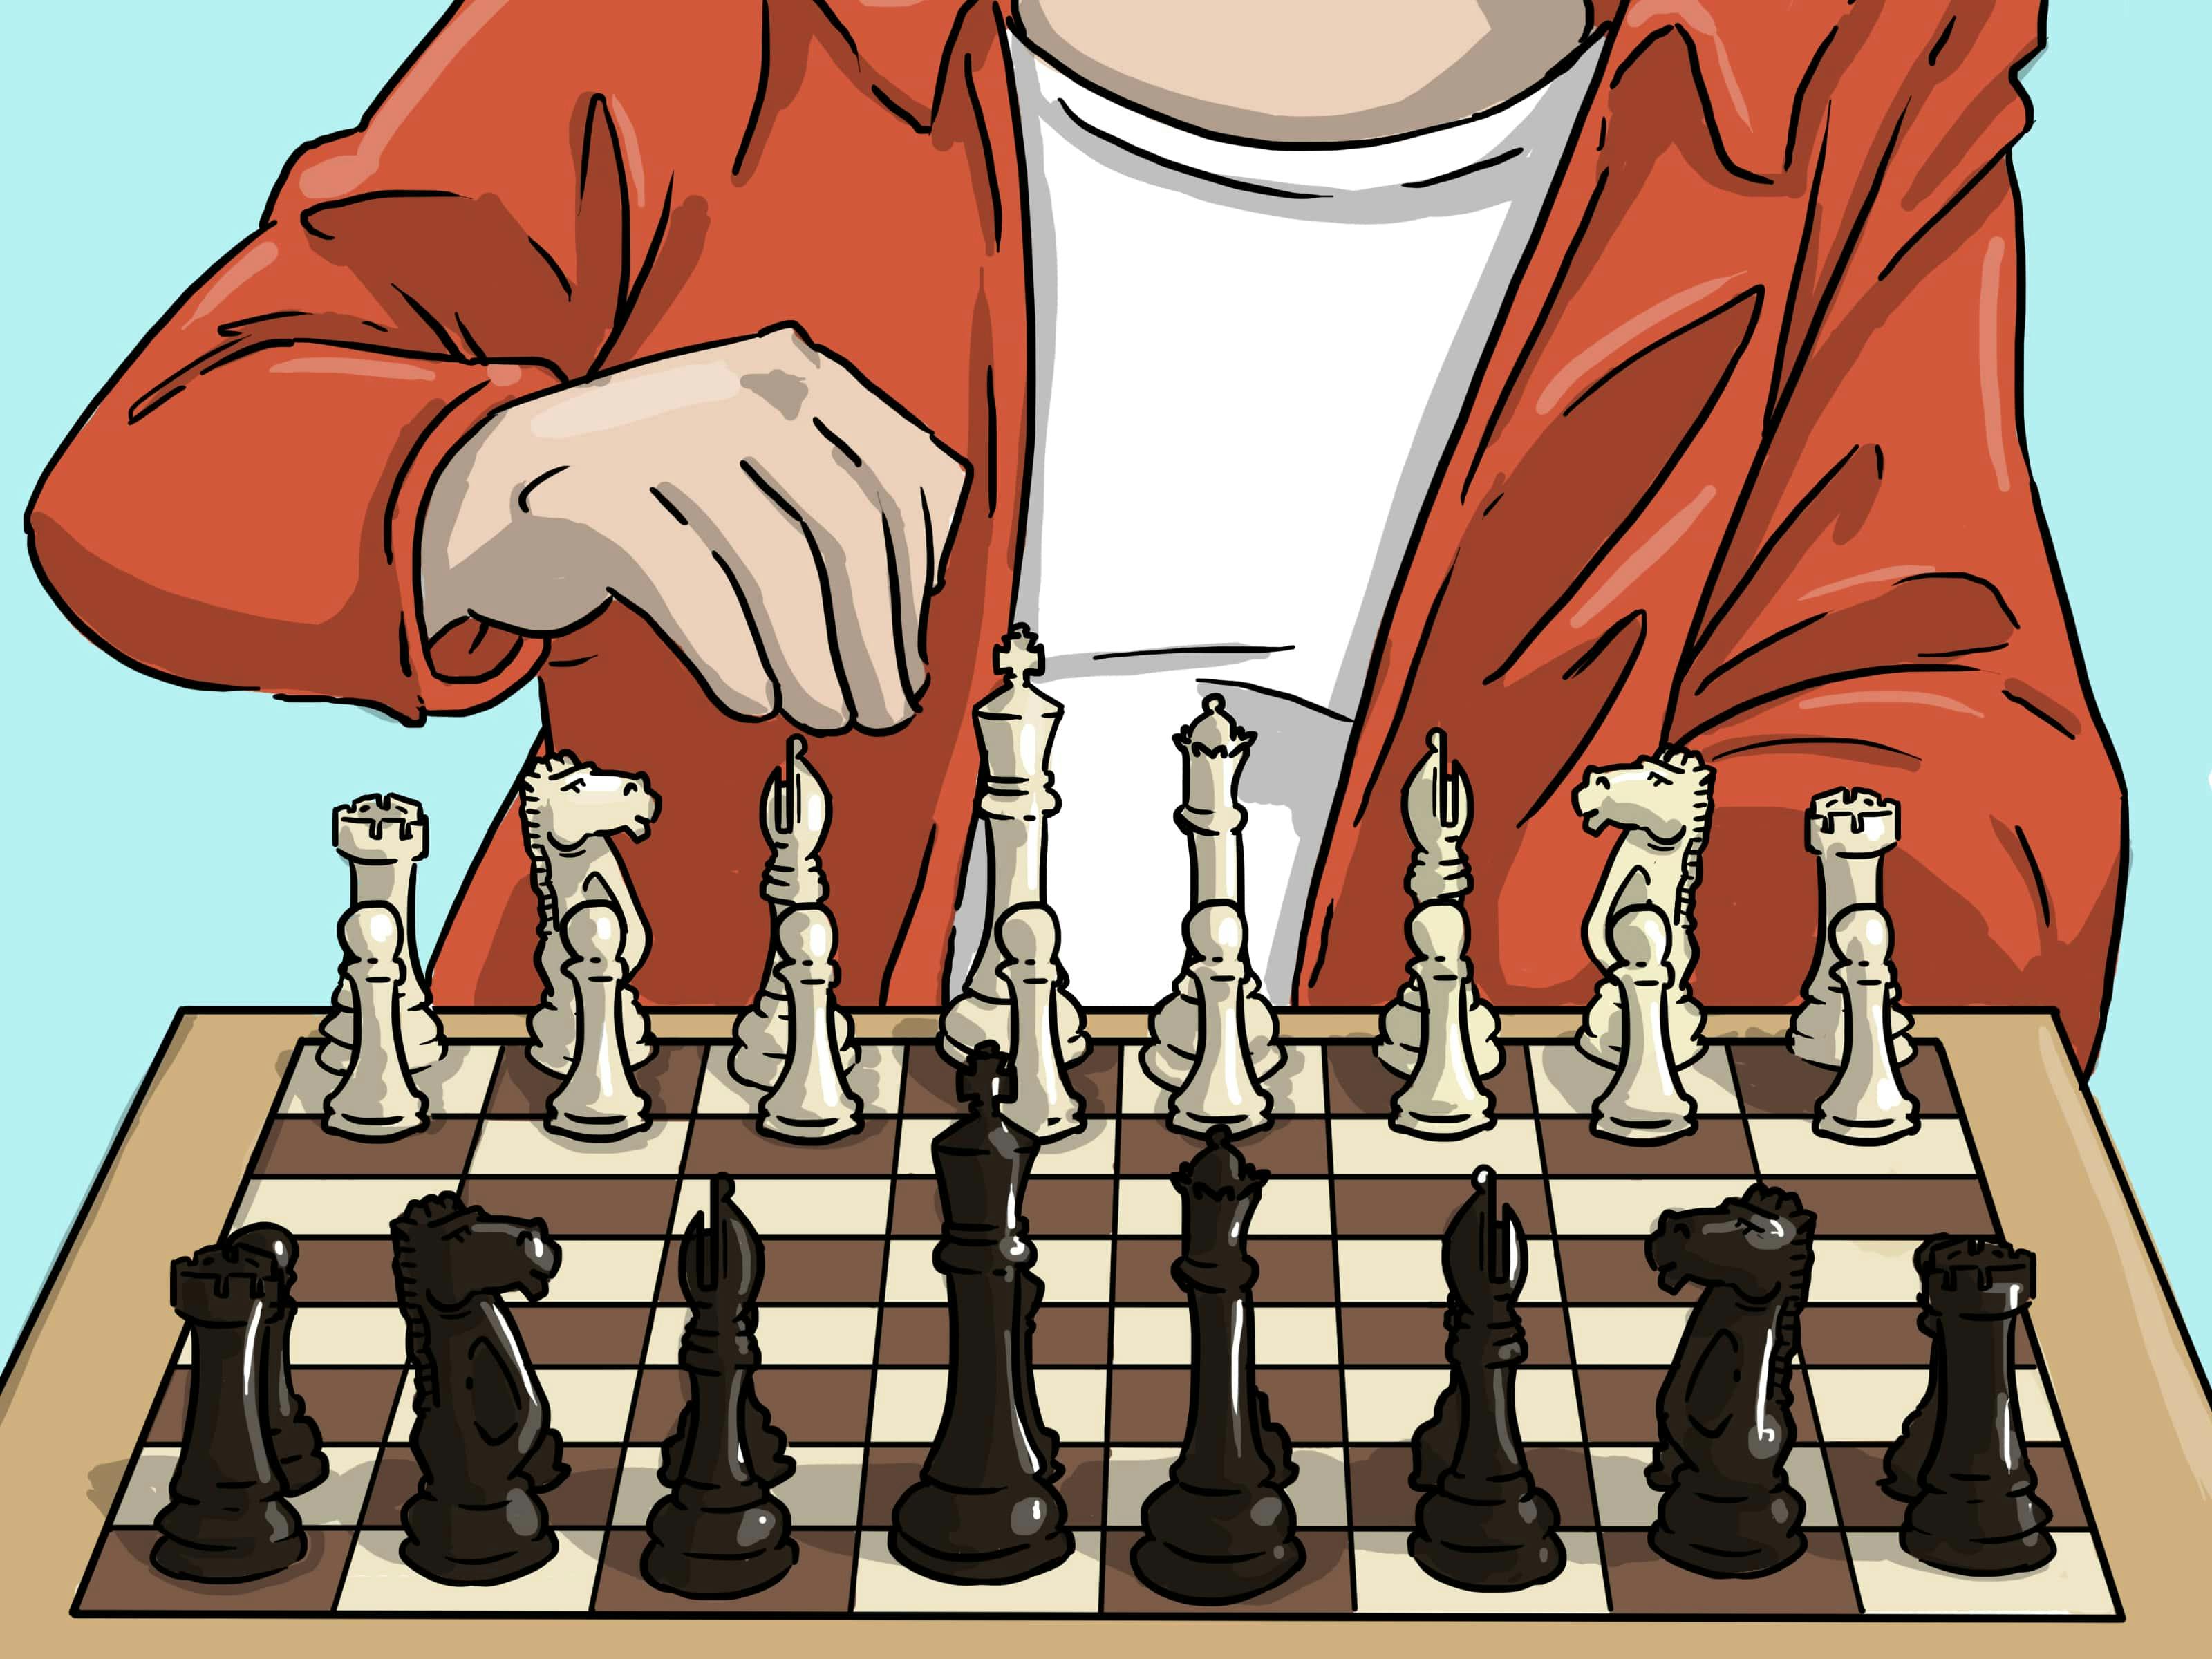 How To Play Chess: Opening Principles 